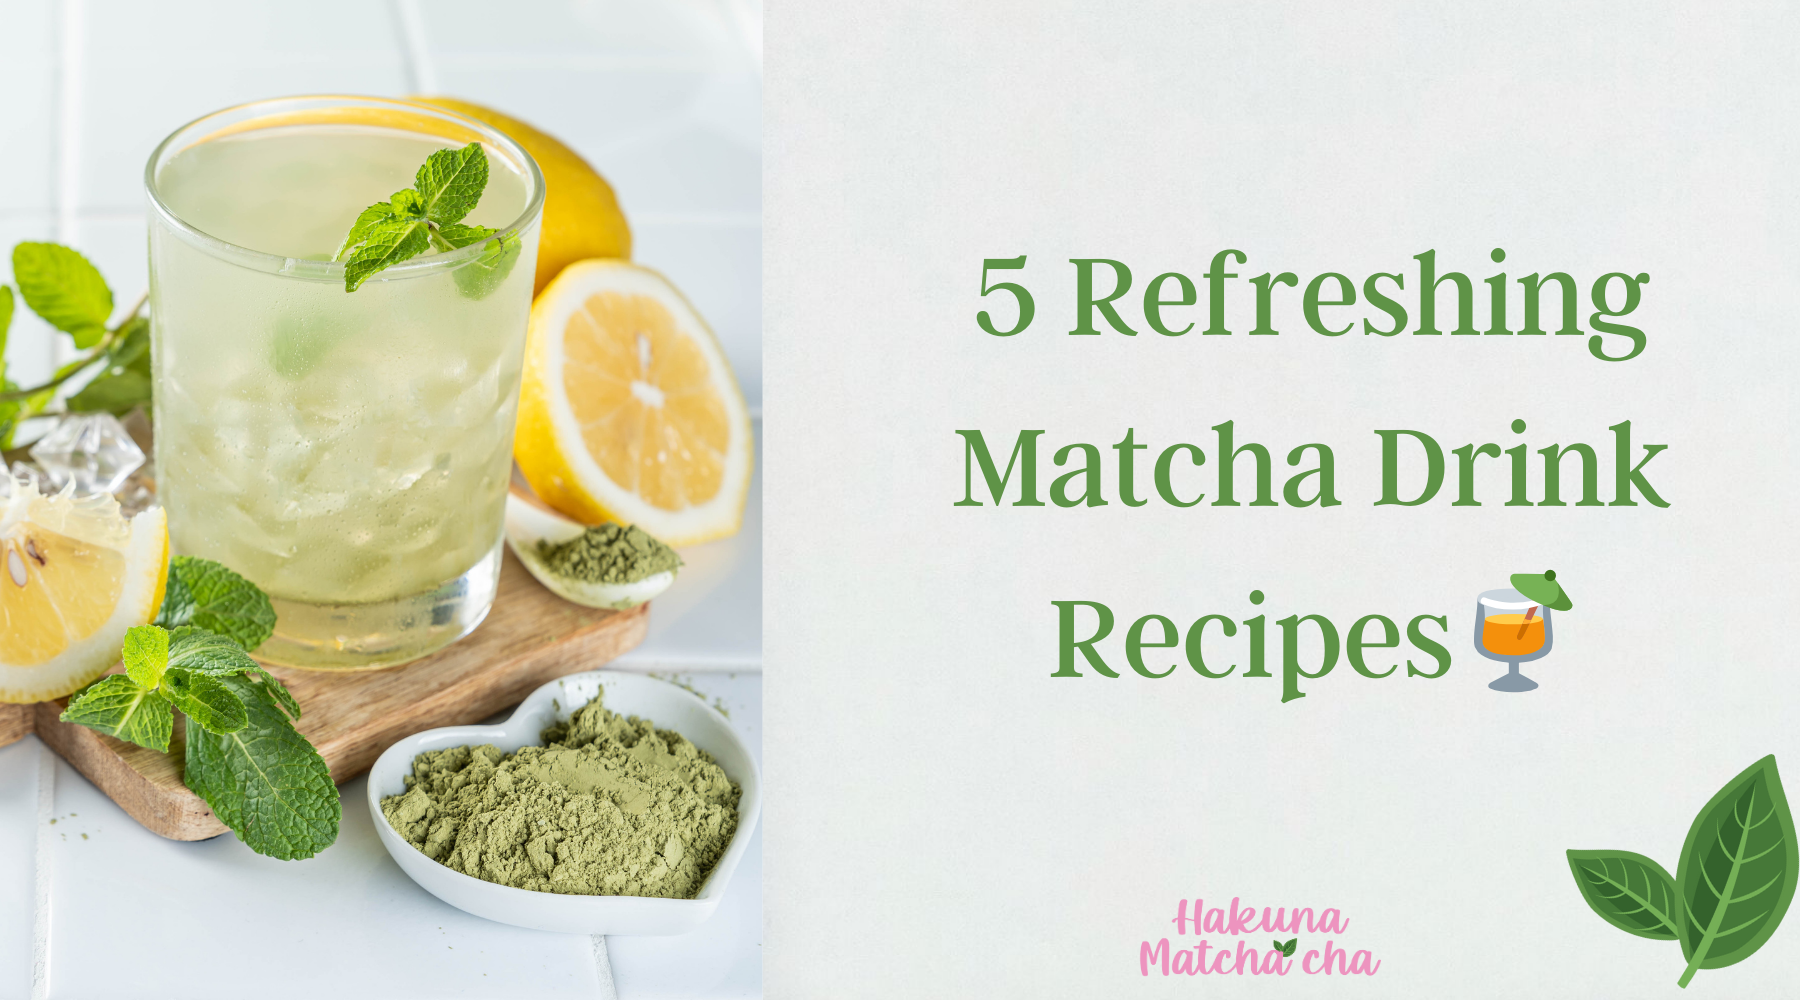 5 Refreshing Matcha Drink Recipes to Cool Off This Summer 🌞🍹